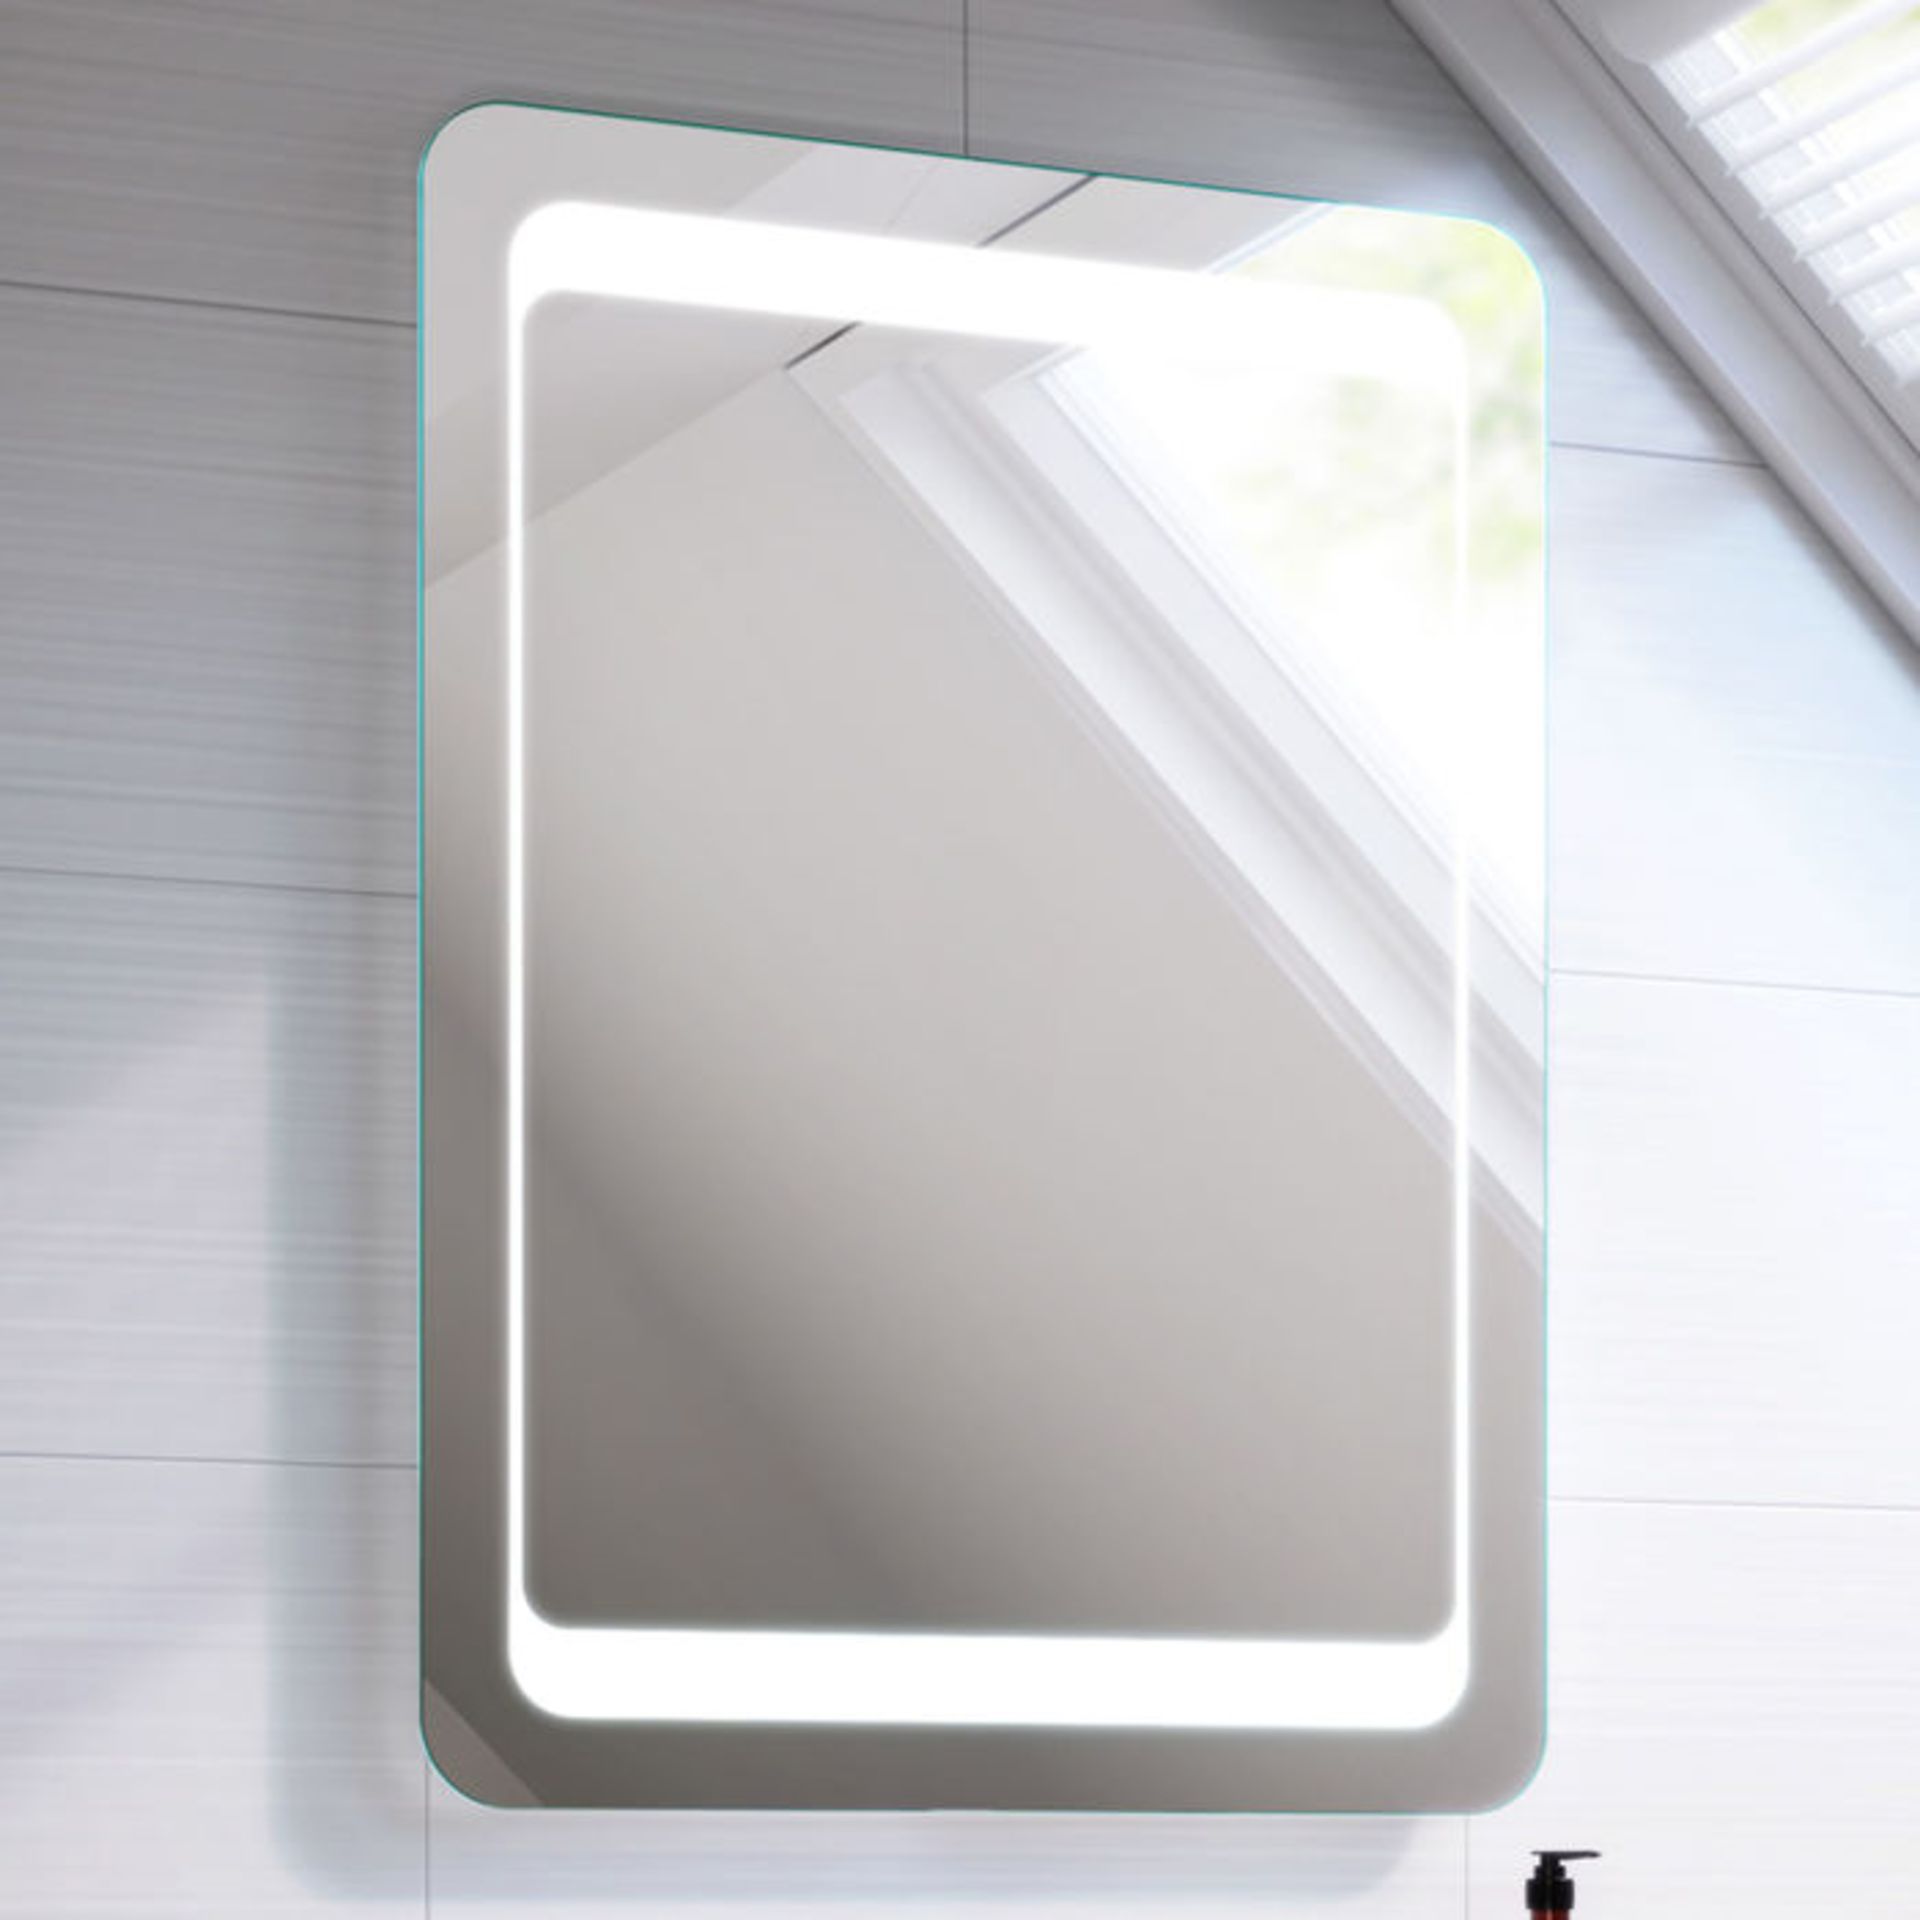 (TY66) 650x900mm Quasar Illuminated LED Mirror. RRP £349.99. Energy efficient LED lighting with IP44 - Image 2 of 4